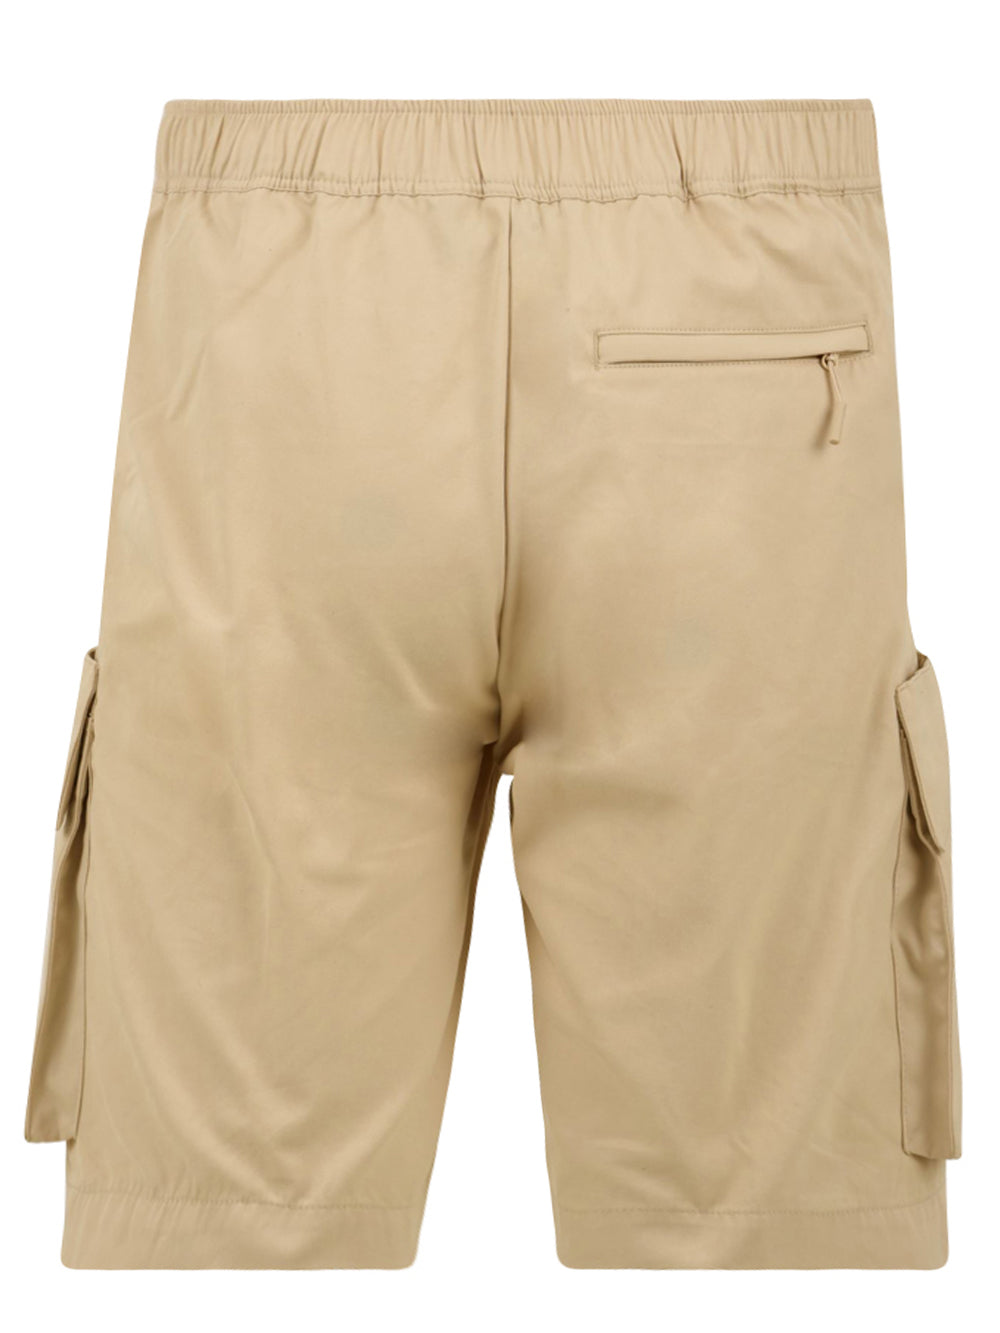 Shorts AFTER LABEL Uomo MOSCA PC046 Beige